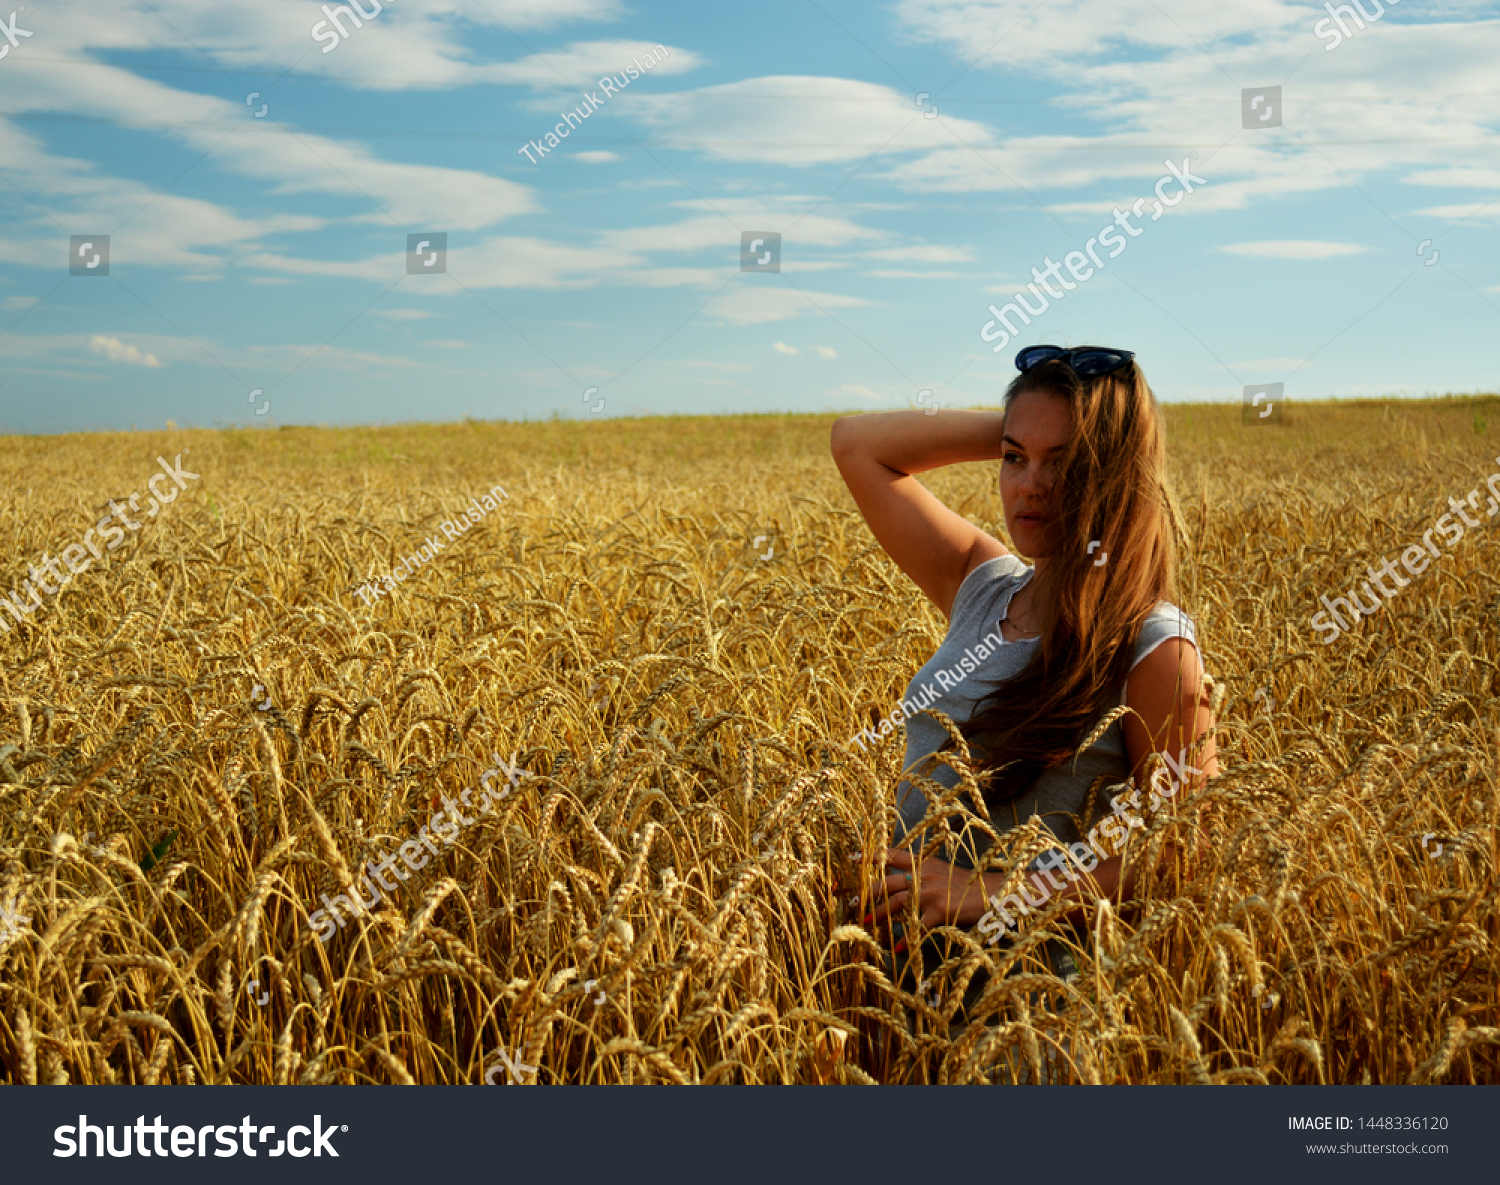 Young beautiful girl stands on a field in wheat under sunlight. #1448336120